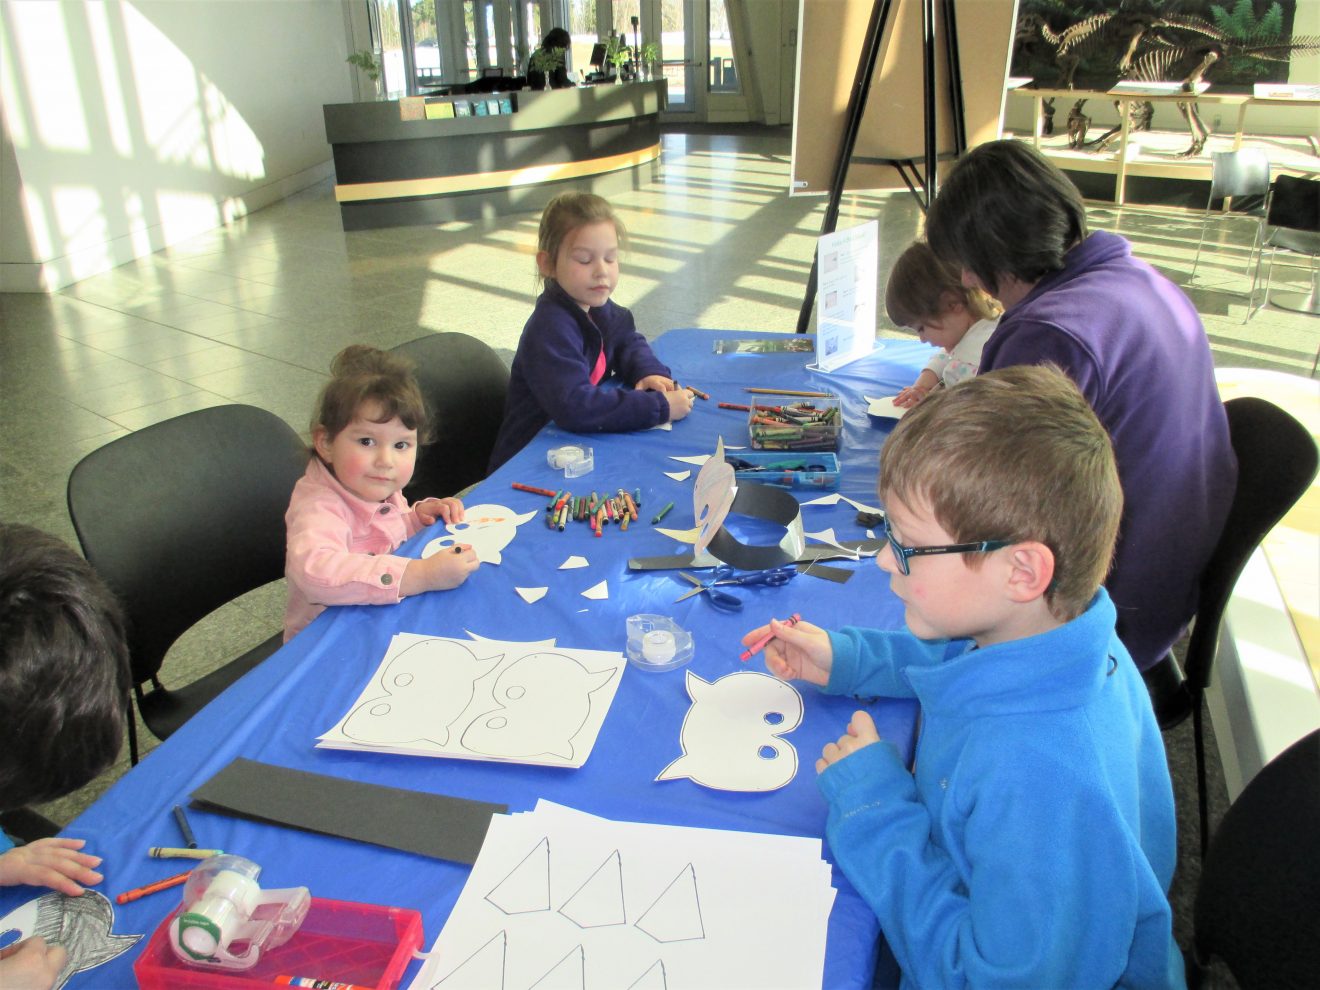 Visitors make bird crafts during a program at the museum.